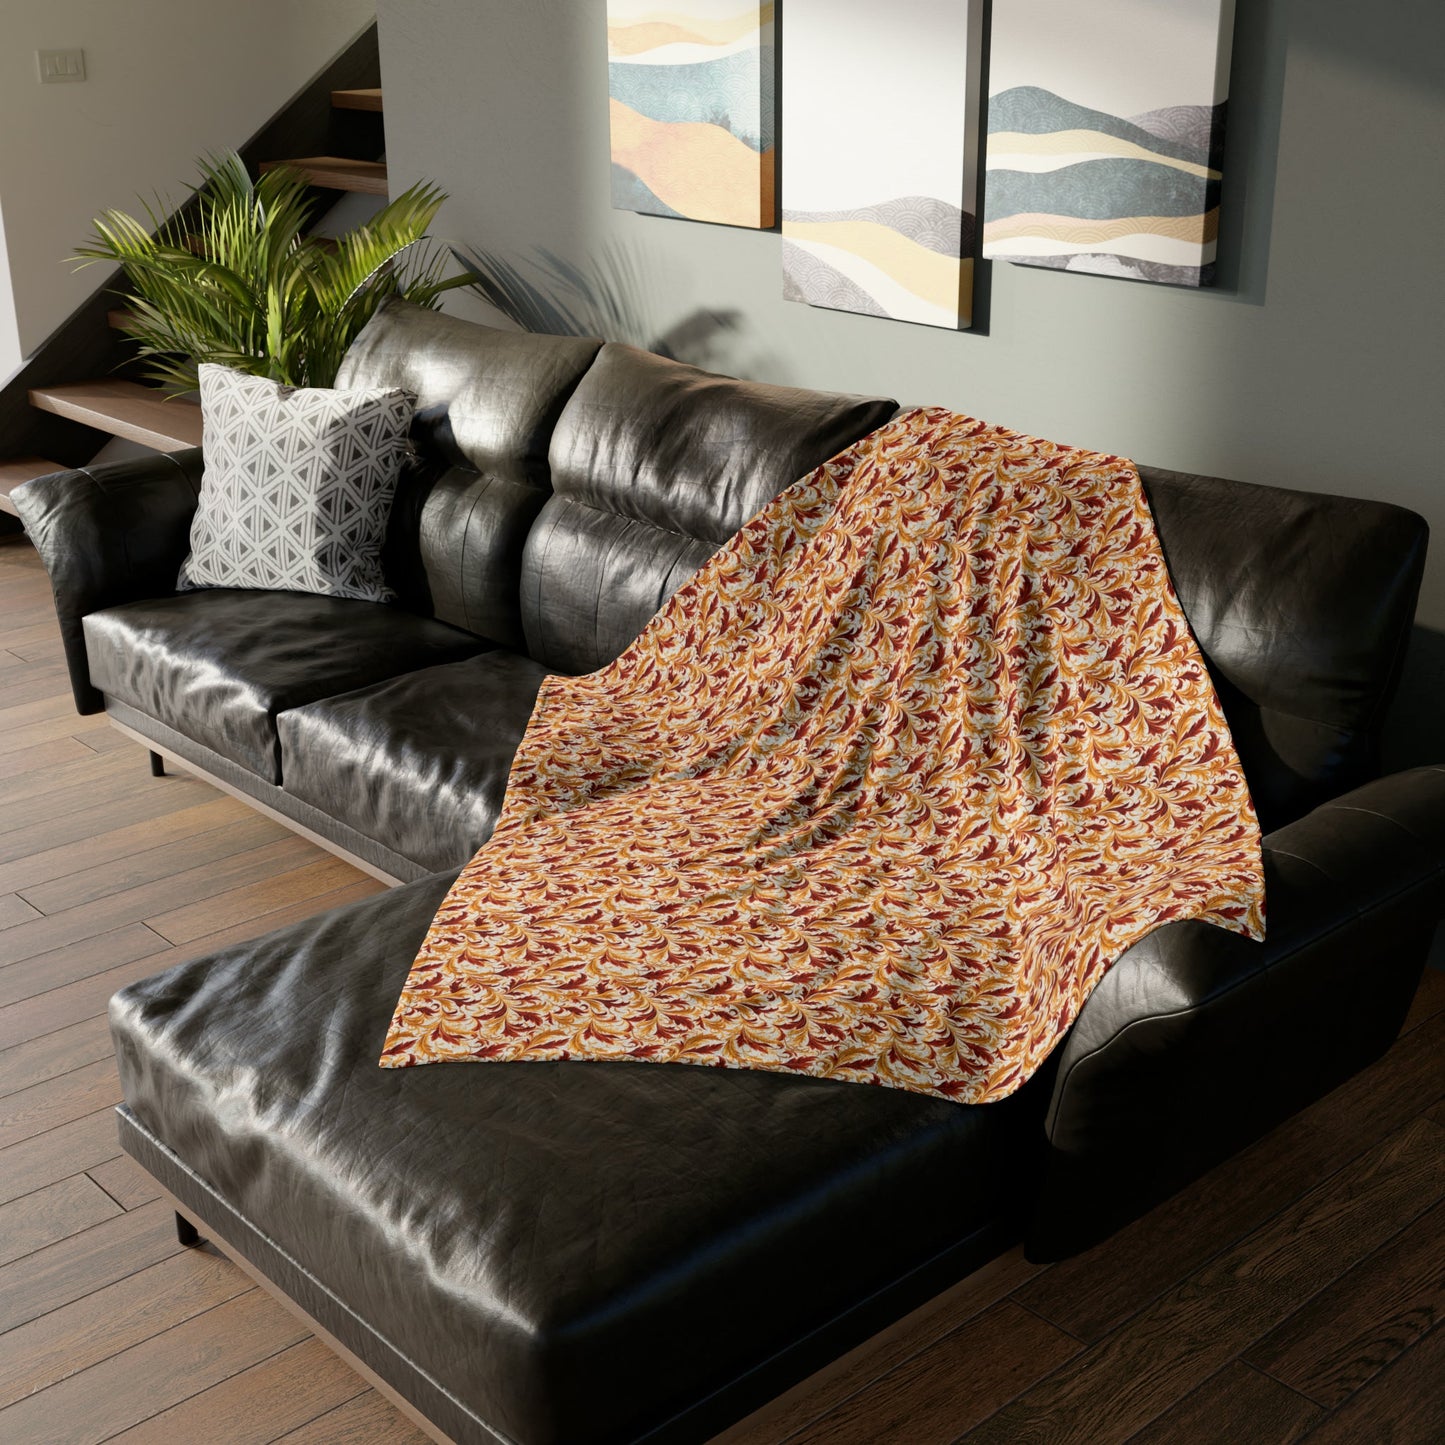 Swirling Autumn: Vortexes of Fall Foliage in Gold and Bronze - The Ideal Throw for Sofas - Pattern Symphony